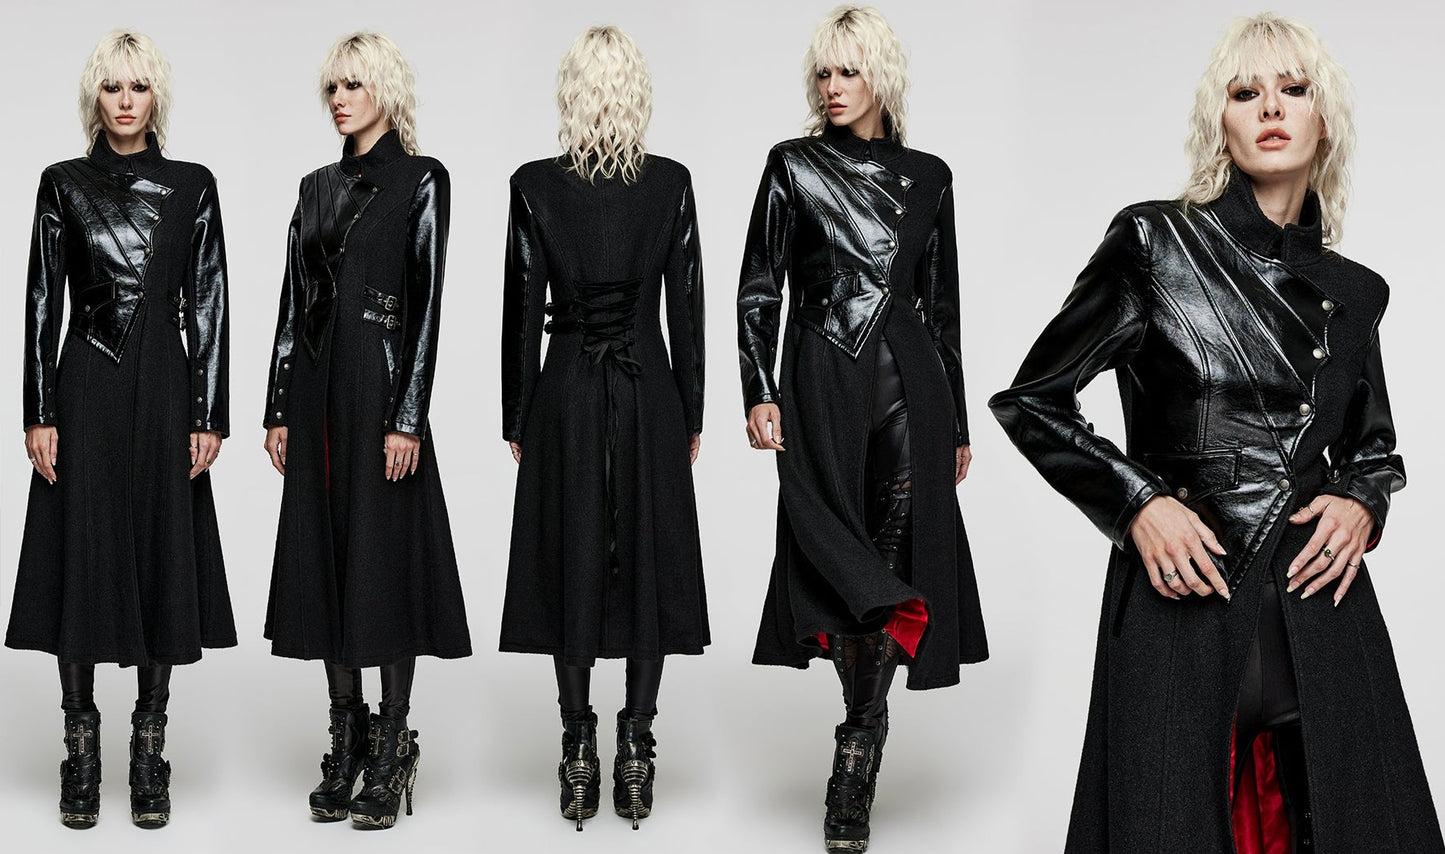 Drawstring Diagonal Pockets Creative Irregular Faux Leather Splicing Faux Leather And Woolen Fabric Gothic Thick Coat